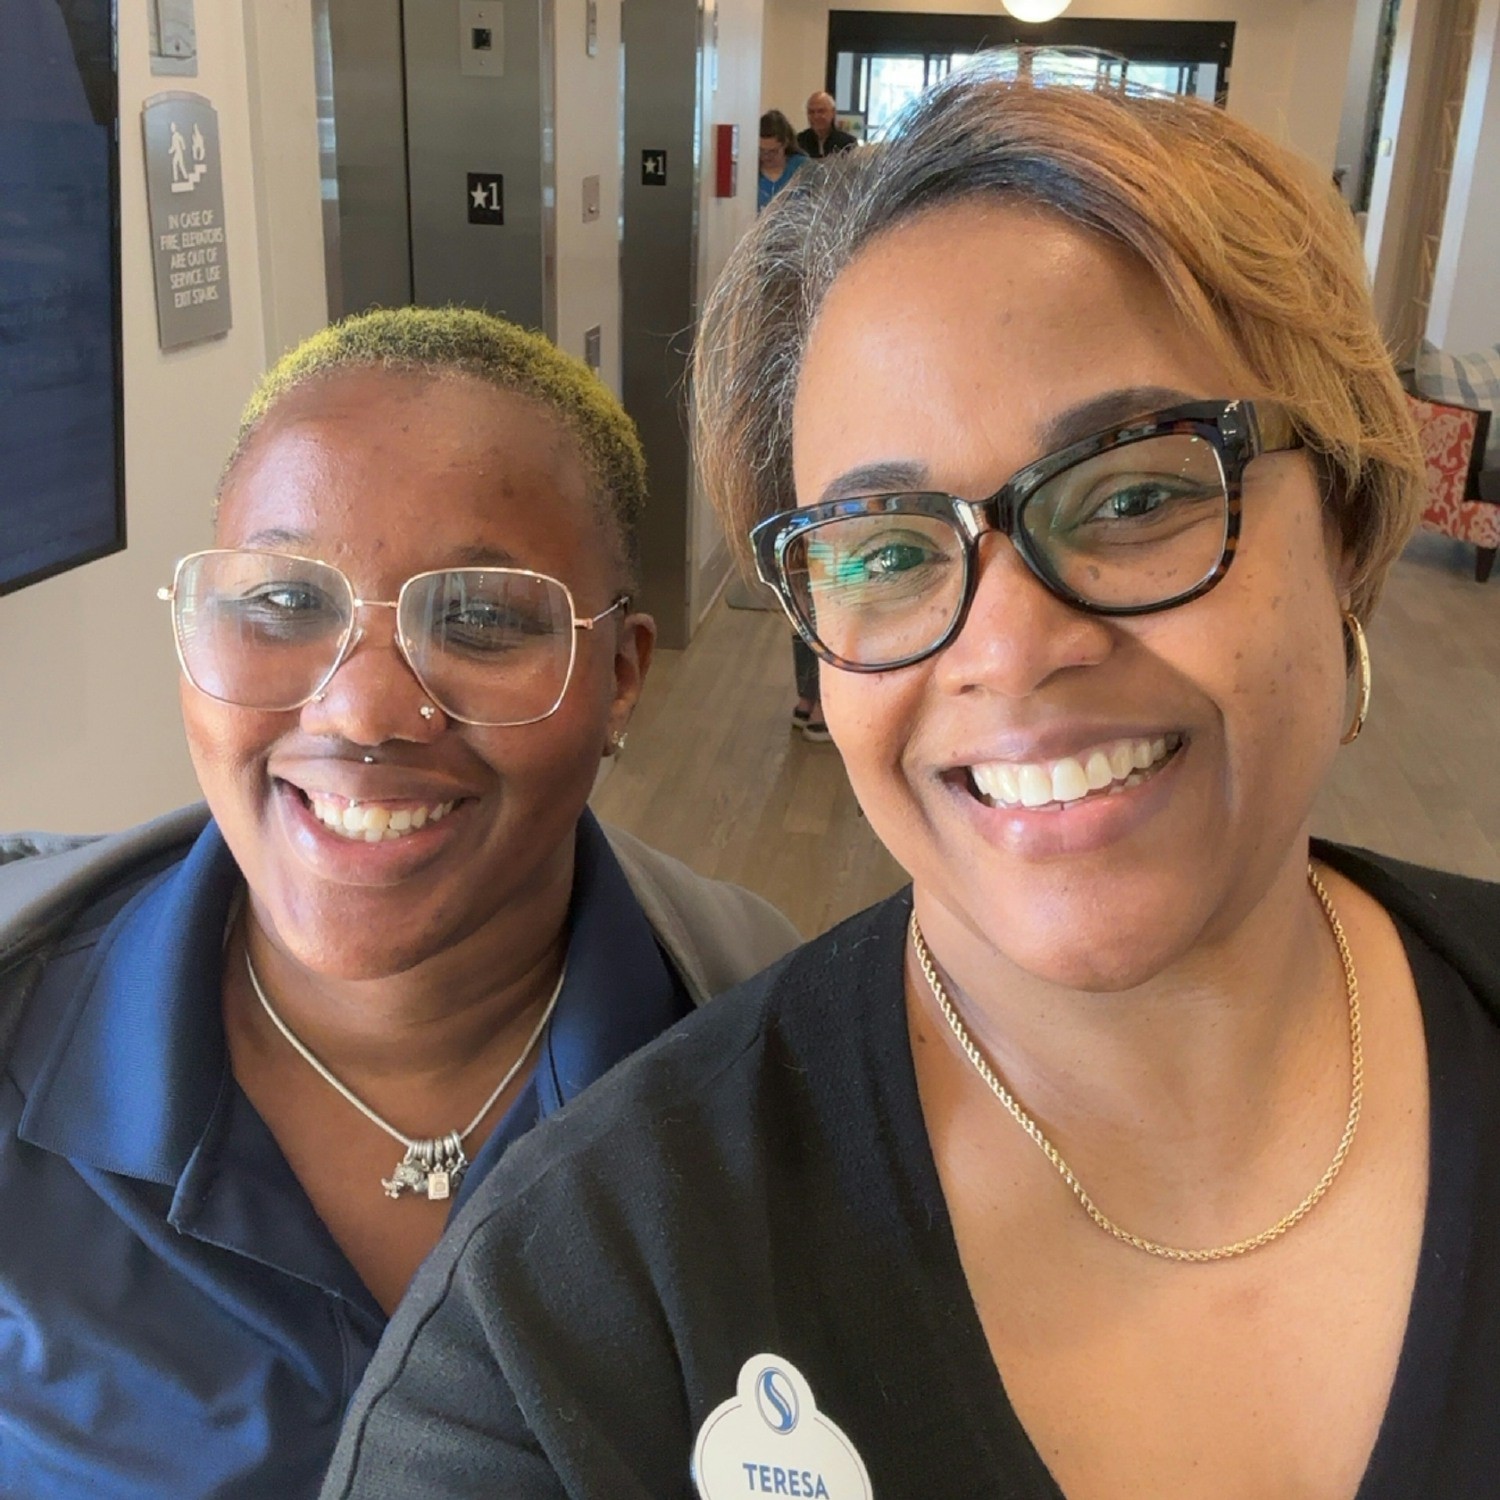 Our work days are filled with serving our residents, but there's always time to stop for a quick selfie with a friend.